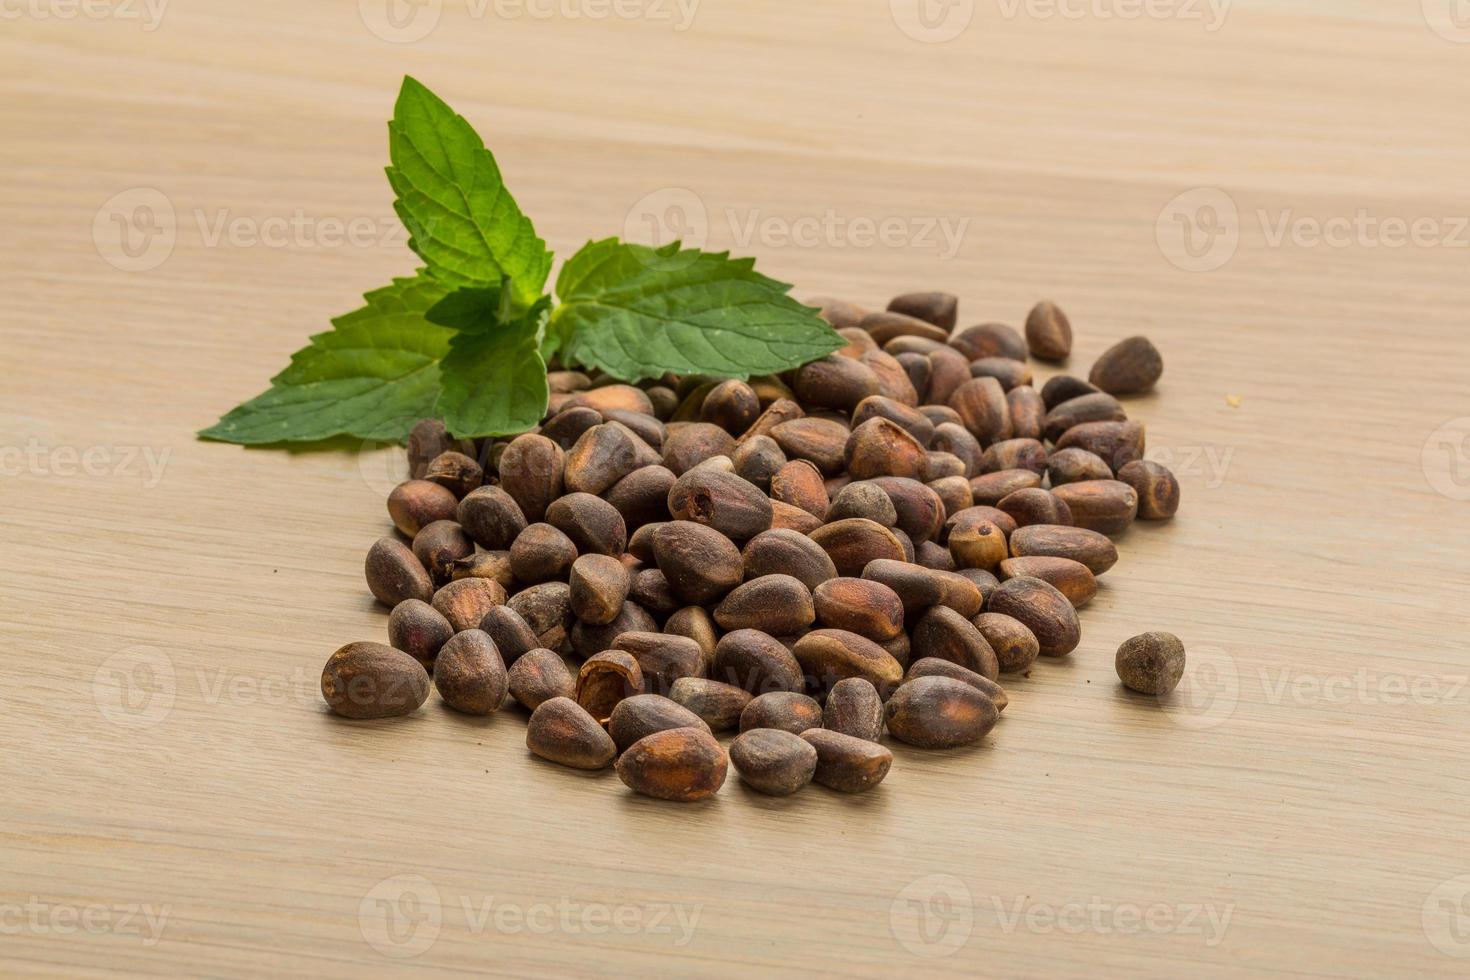 Cedar nuts on wooden background photo